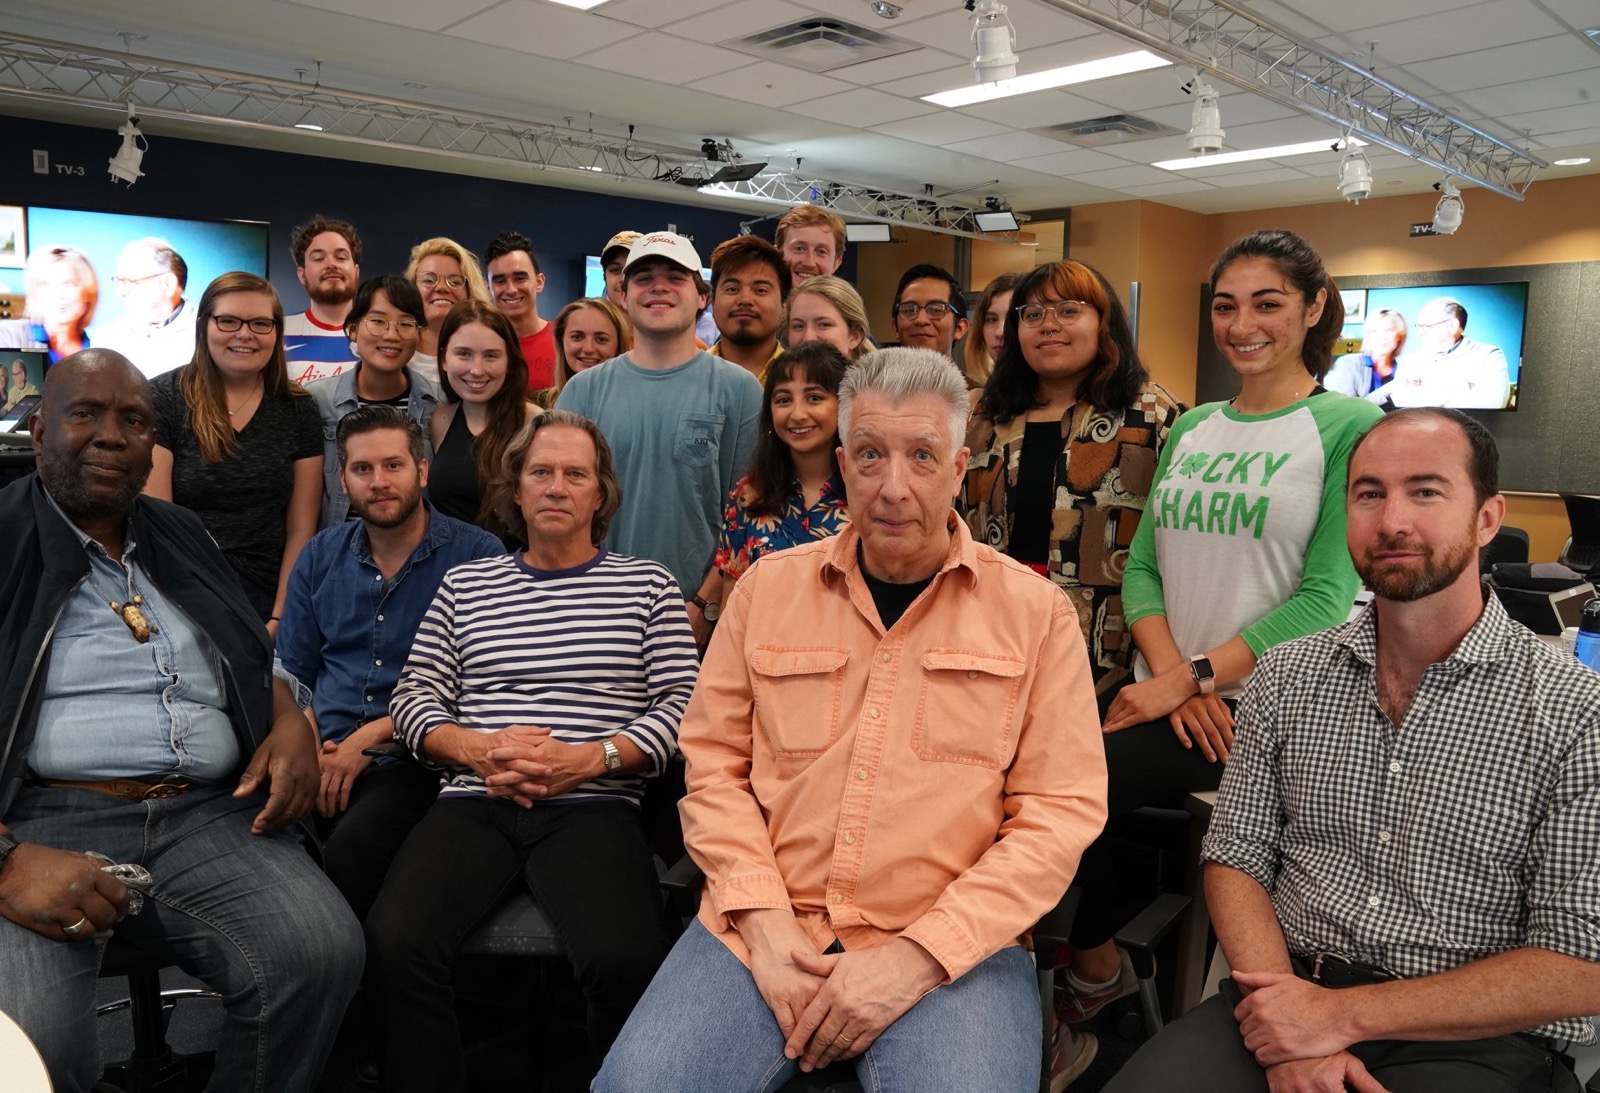 Joined by former journalism professor Eli Reed (far left) and journalism lecturer John Savage (far right), Dahlby poses for a photo with the Reporting Texas newsroom class.